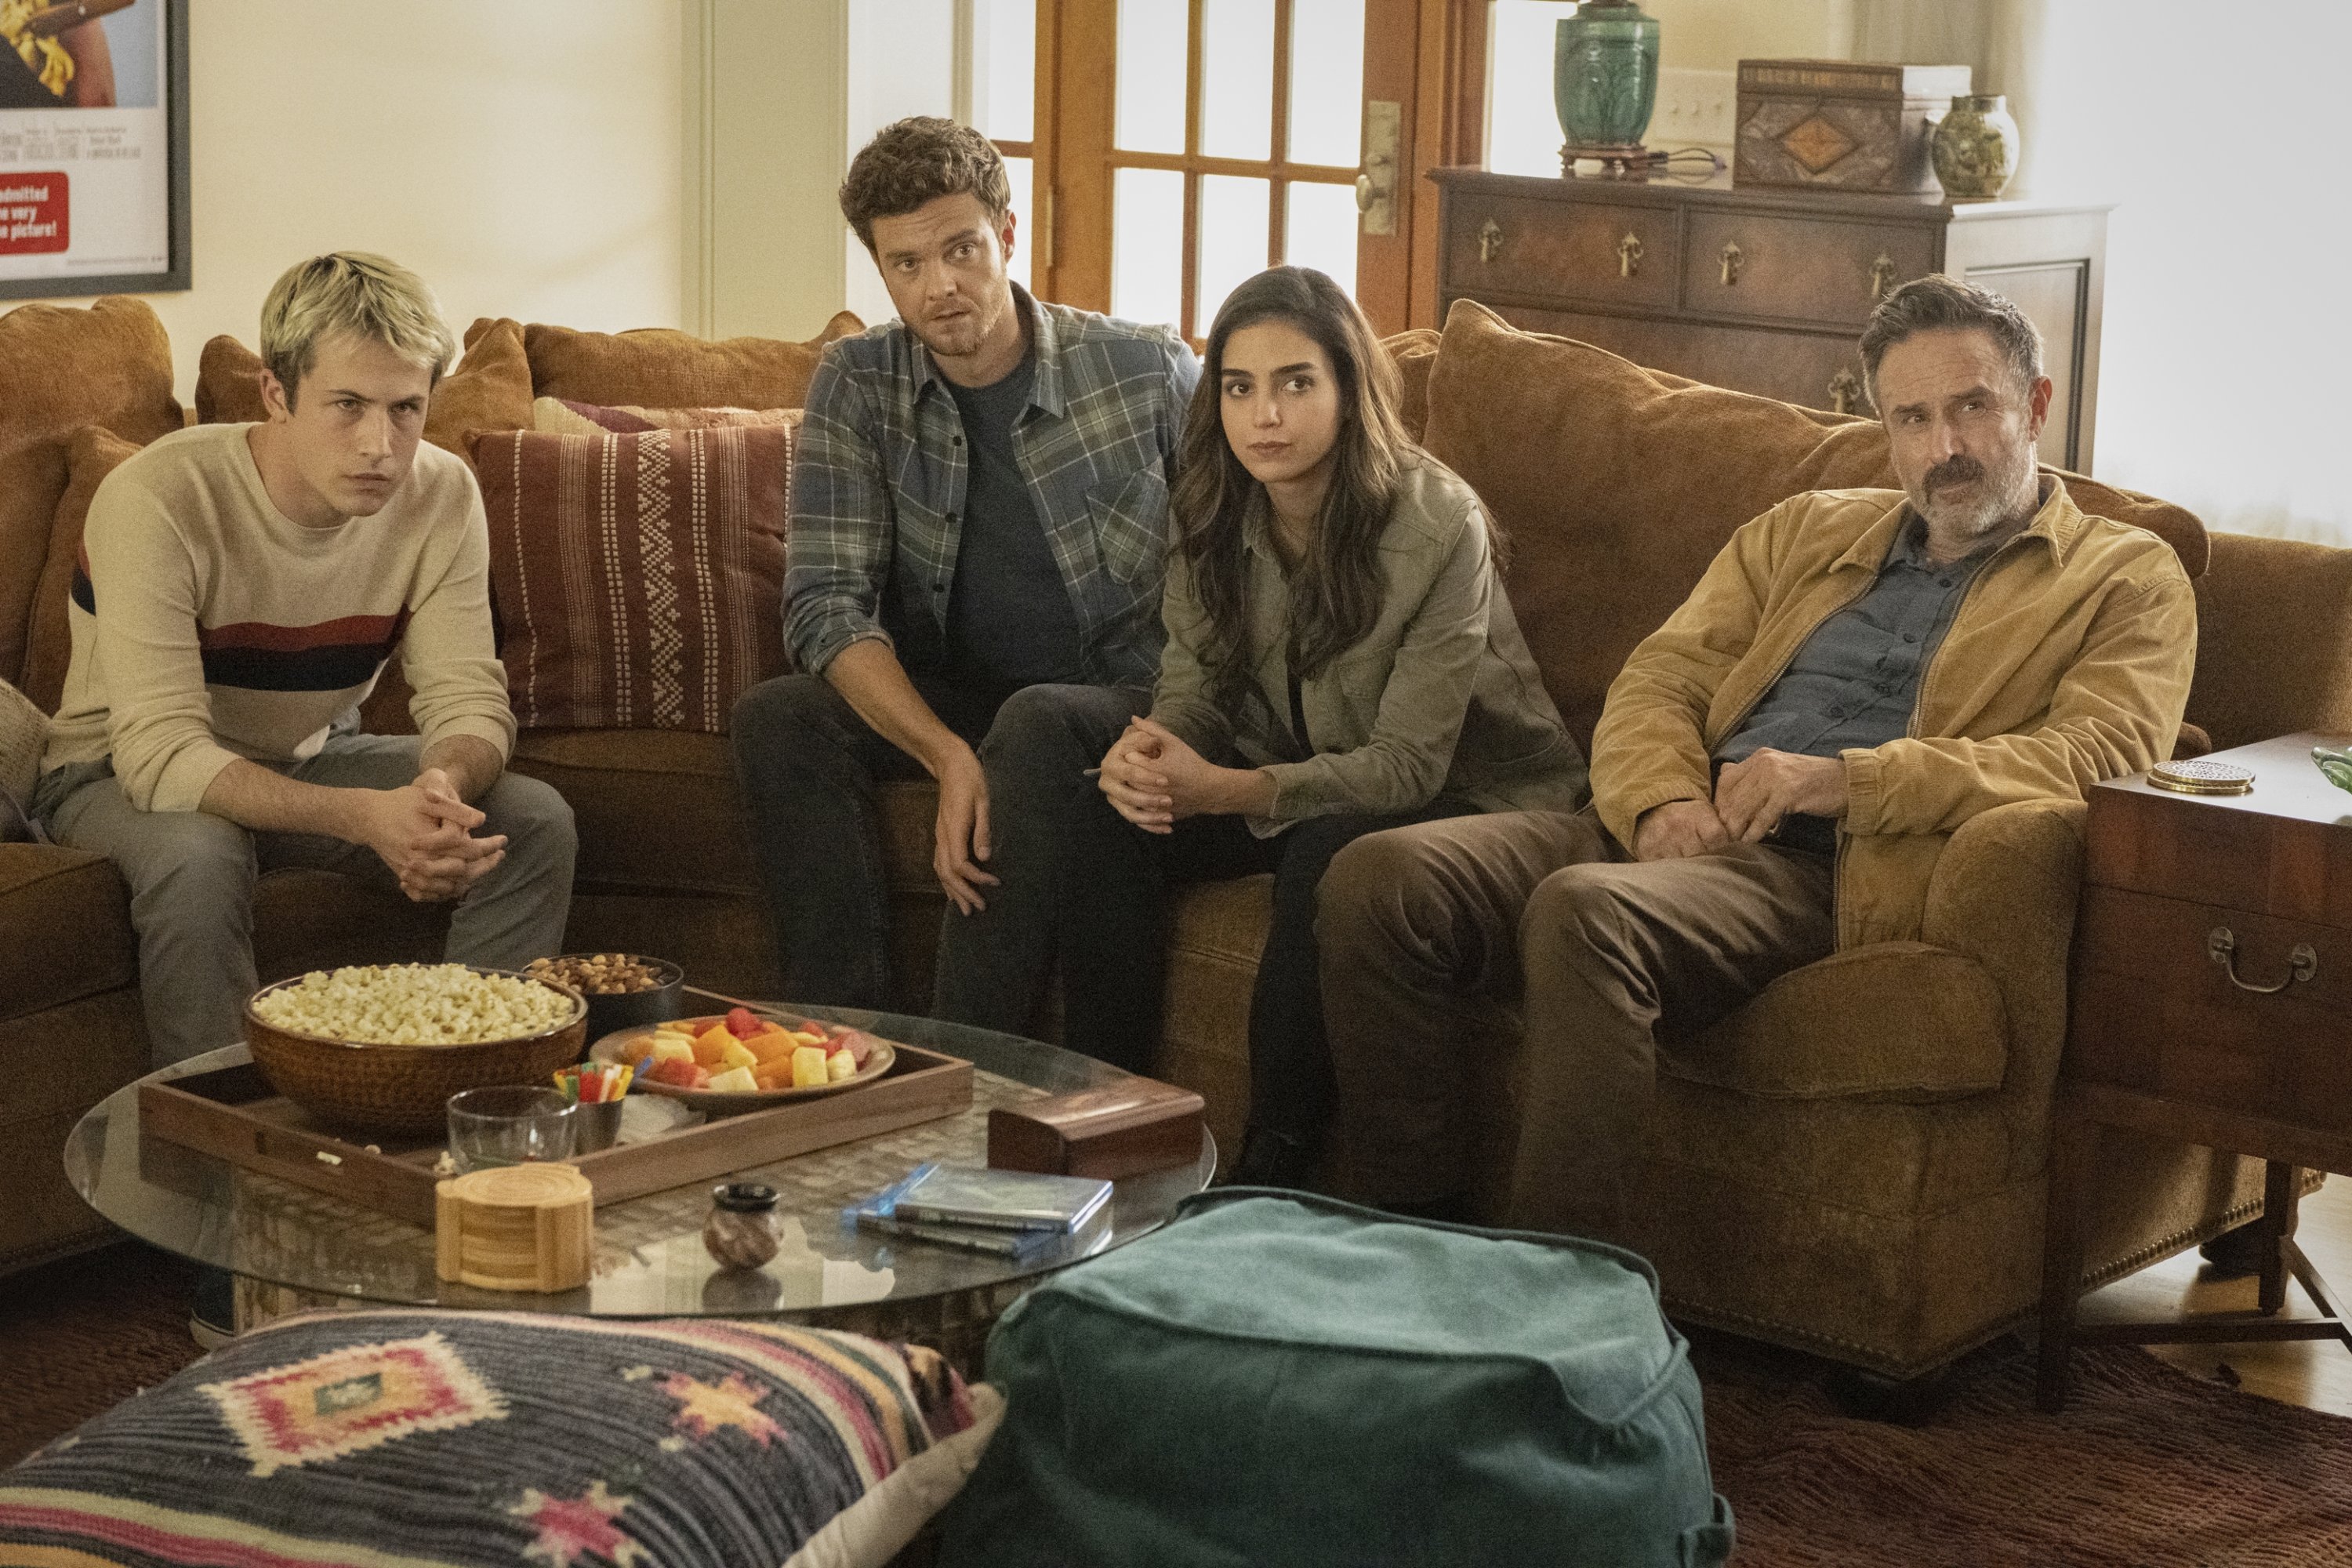 This image released by Paramount Pictures shows Dylan Minnette (L), Jack Quaid, Melissa Barrera and David Arquette in a scene from "Scream." (AP)